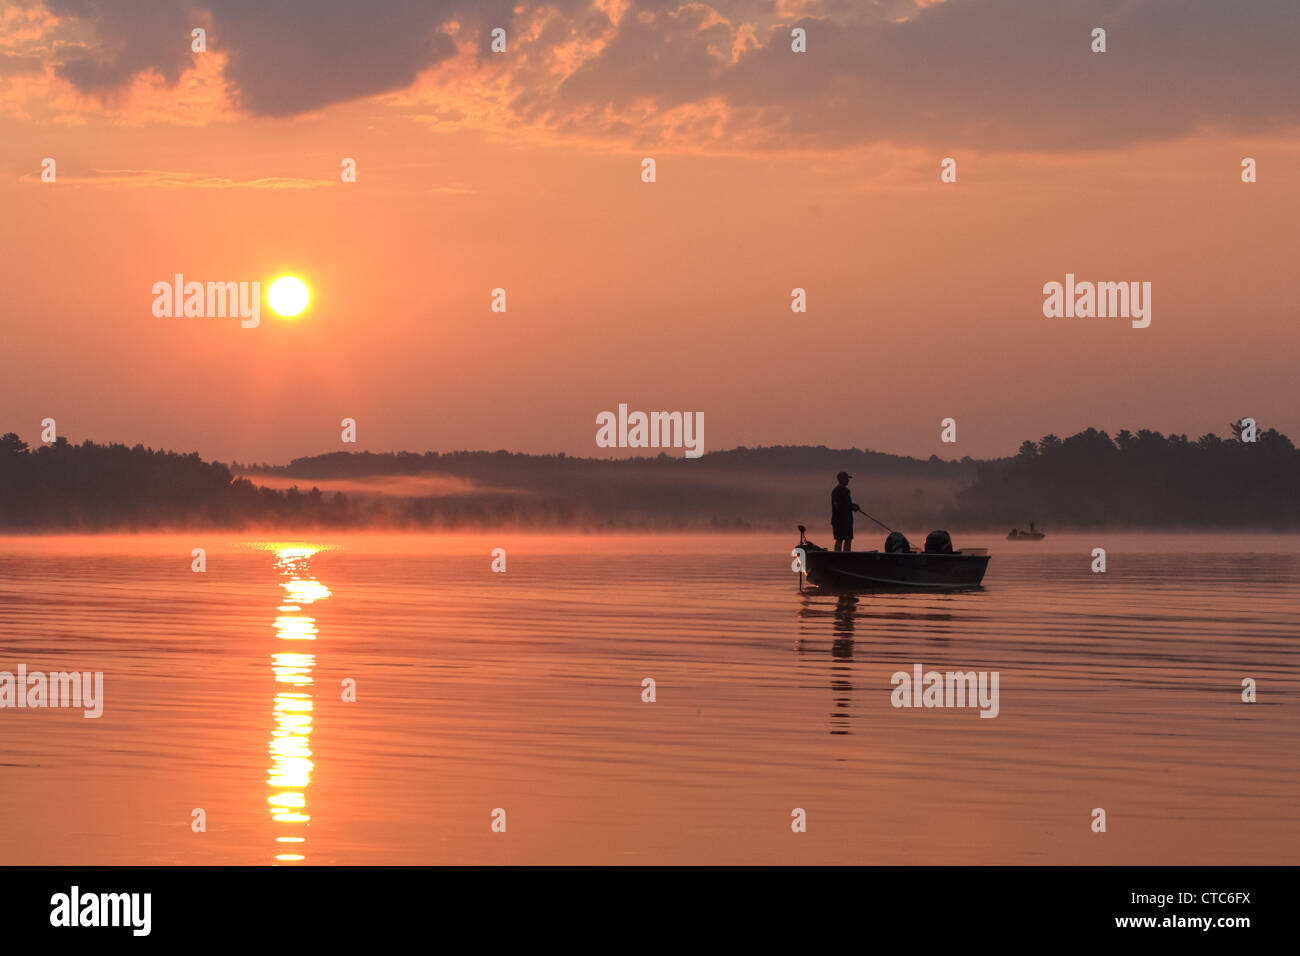 Fisherman in a boat silhouetted against a rising sun. Stock Photo